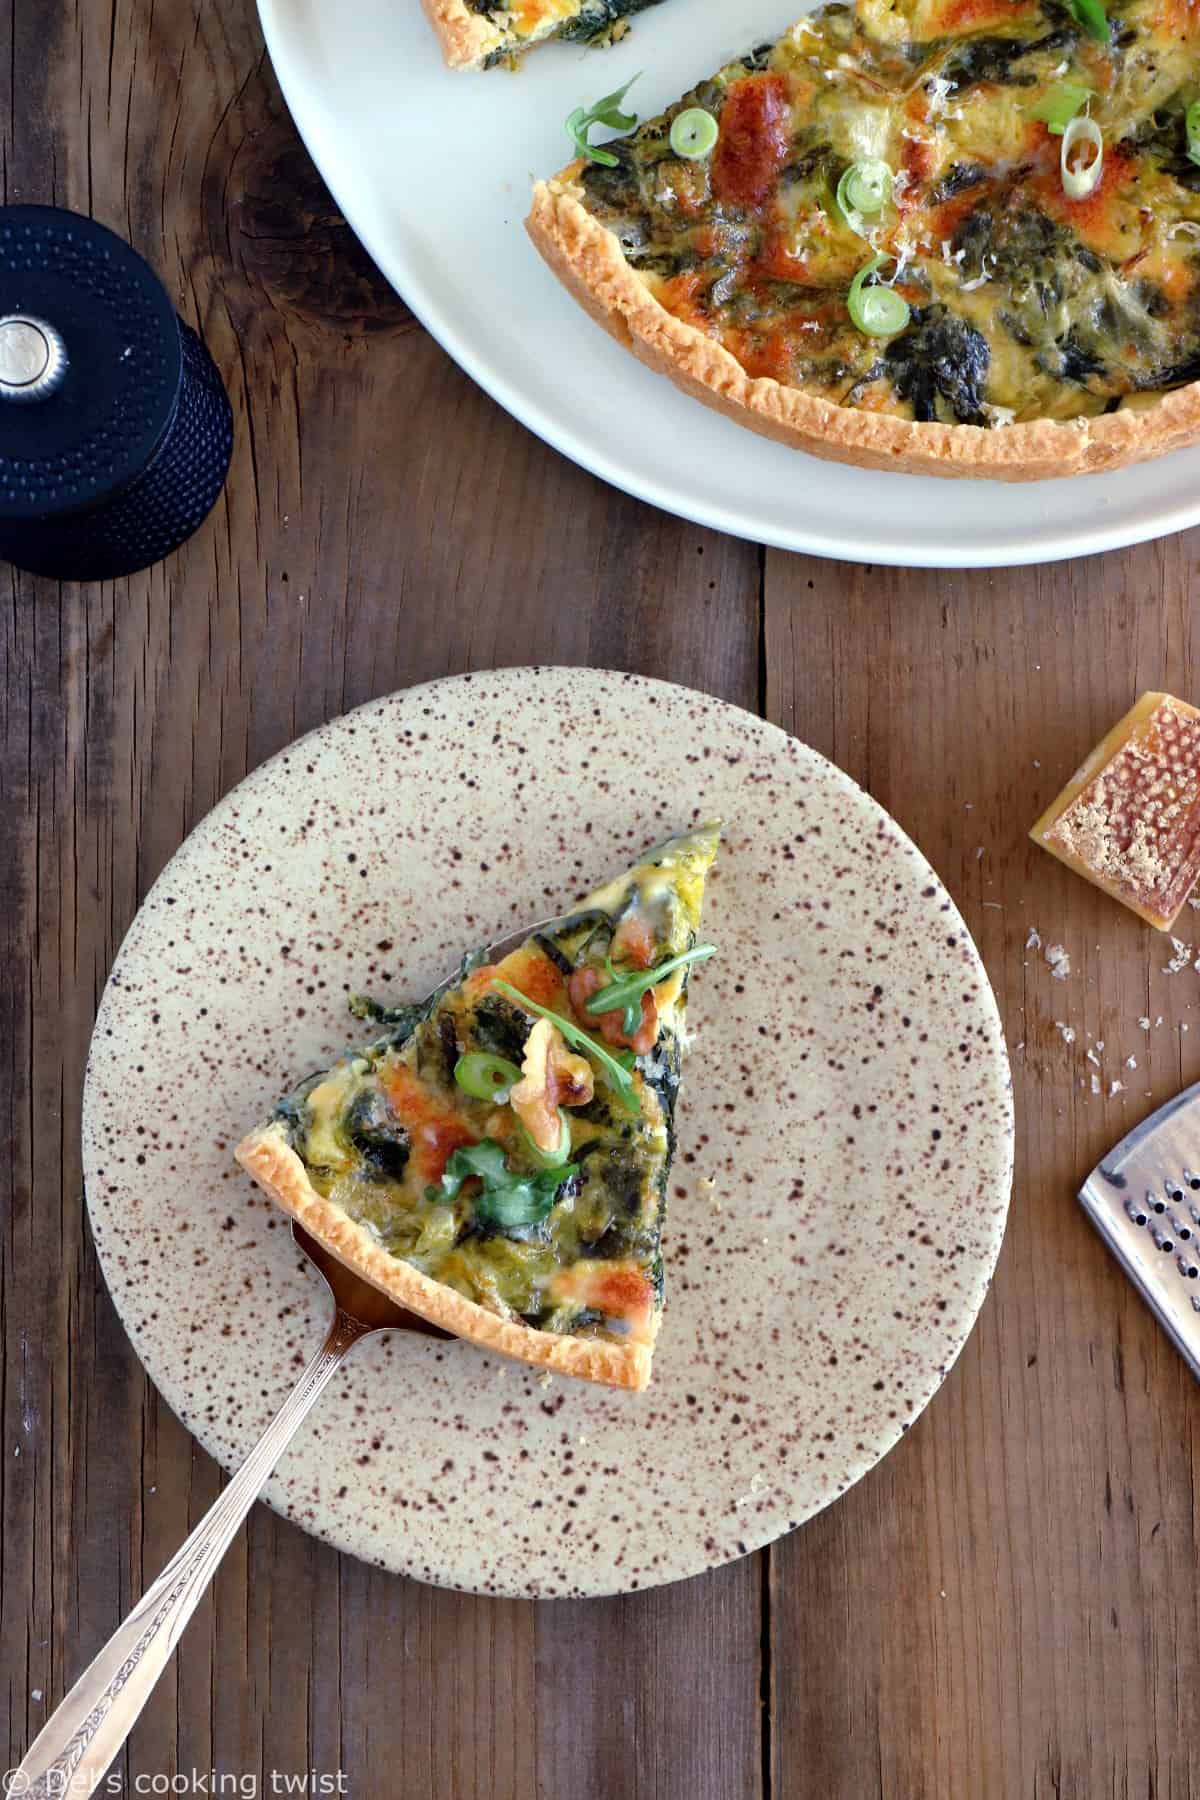 French leek quiche is a classic winter weeknight dinner in France. Plant-based and prepared with Comté cheese, this dish is full of comforting flavors.